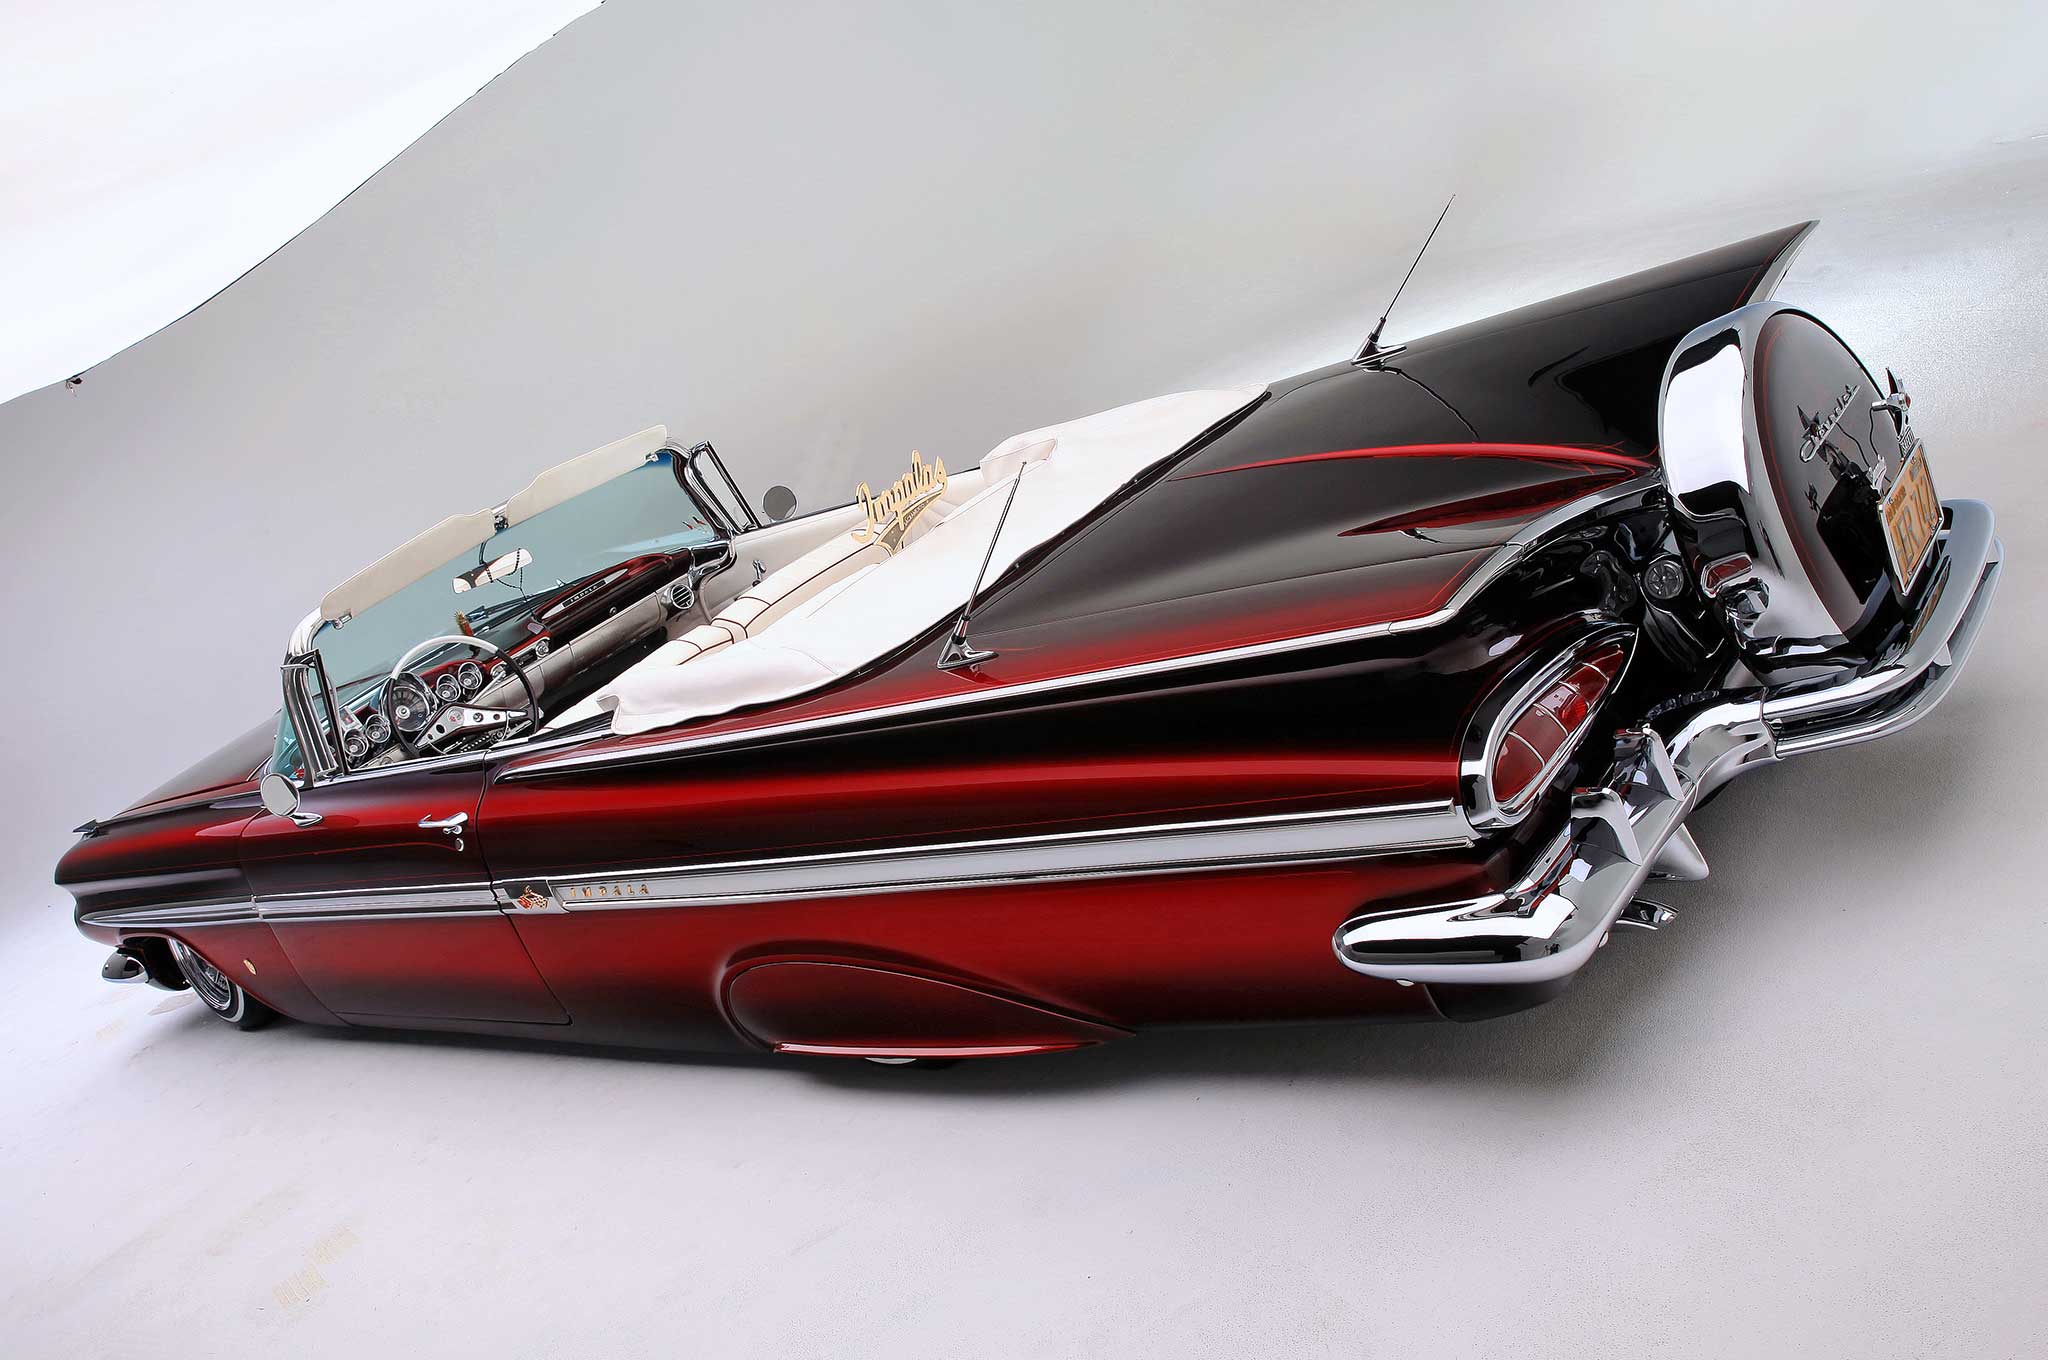 1959 Chevrolet Impala Convertible Lowrider Muscle Car 2048x1360